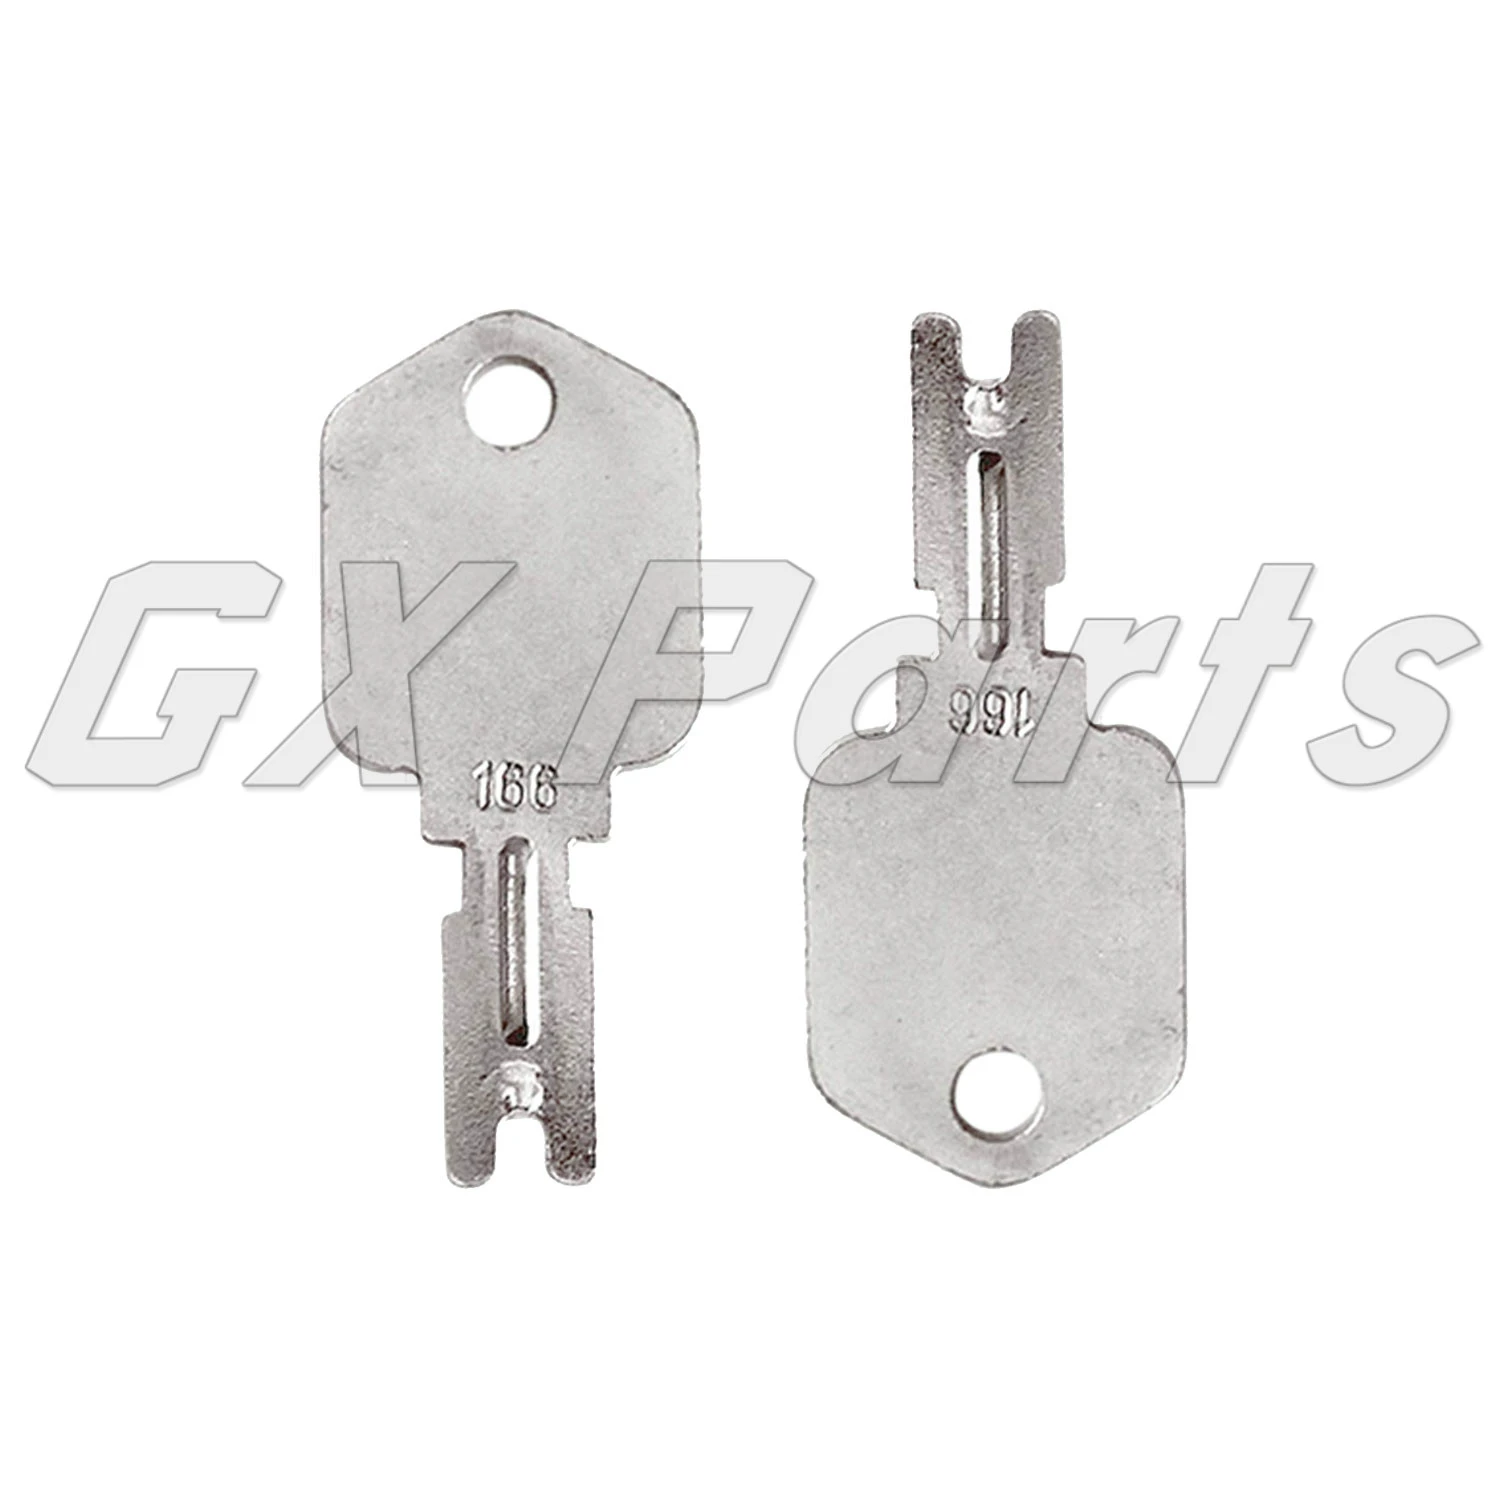 186304 Forklift Key Heavy Equipment Ignition Key 2pcs For Mustang 090 32025 090 32026 Generic 166 Hyster Car Key Aliexpress